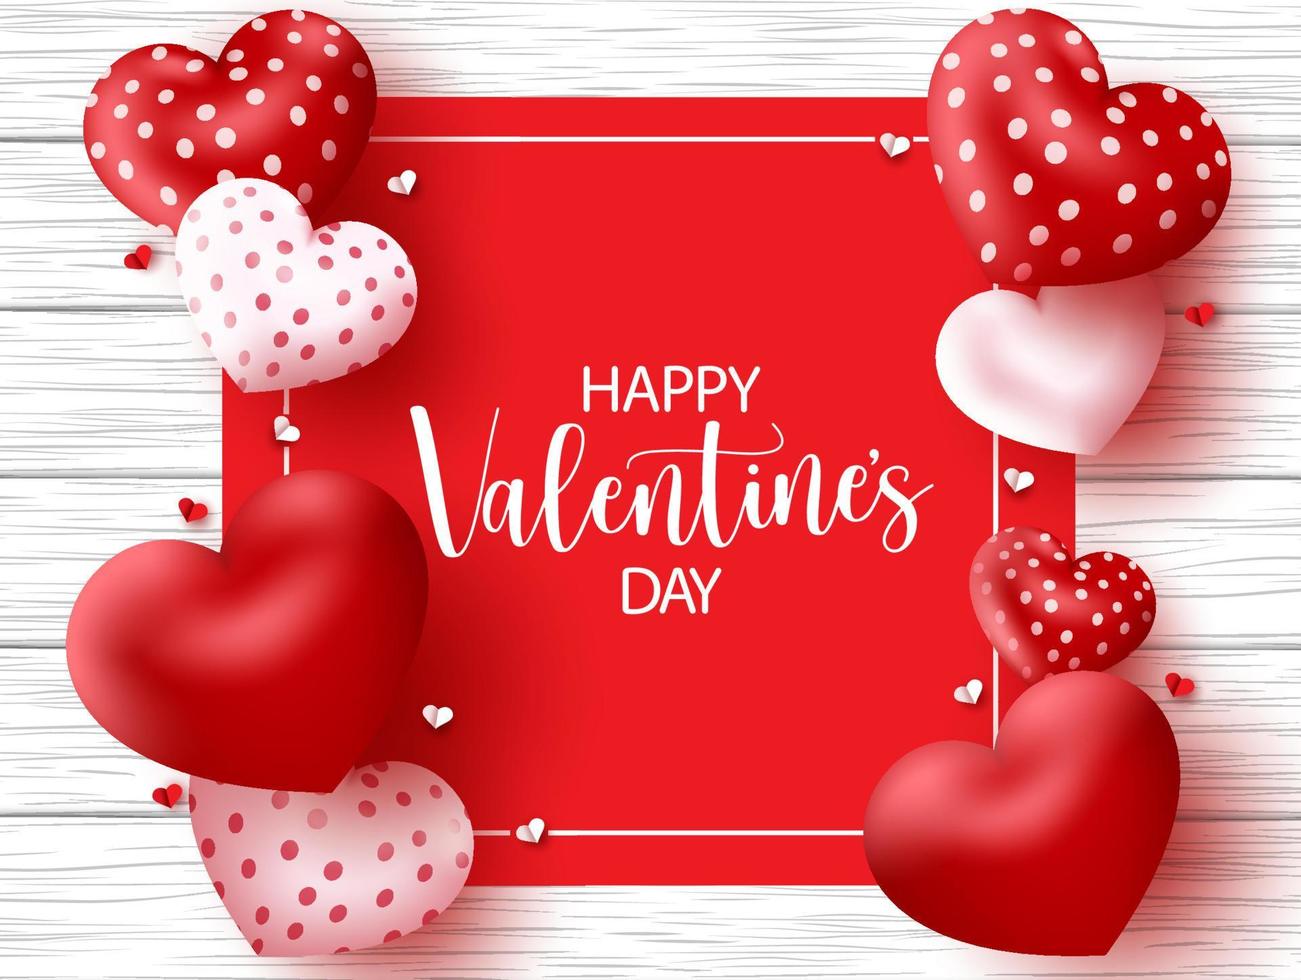 Valentine's day vector template design. Happy valentine's day text in empty red space for messages with 3d realistic and paper cut heart shape element for valentines greeting card. Vector illustration